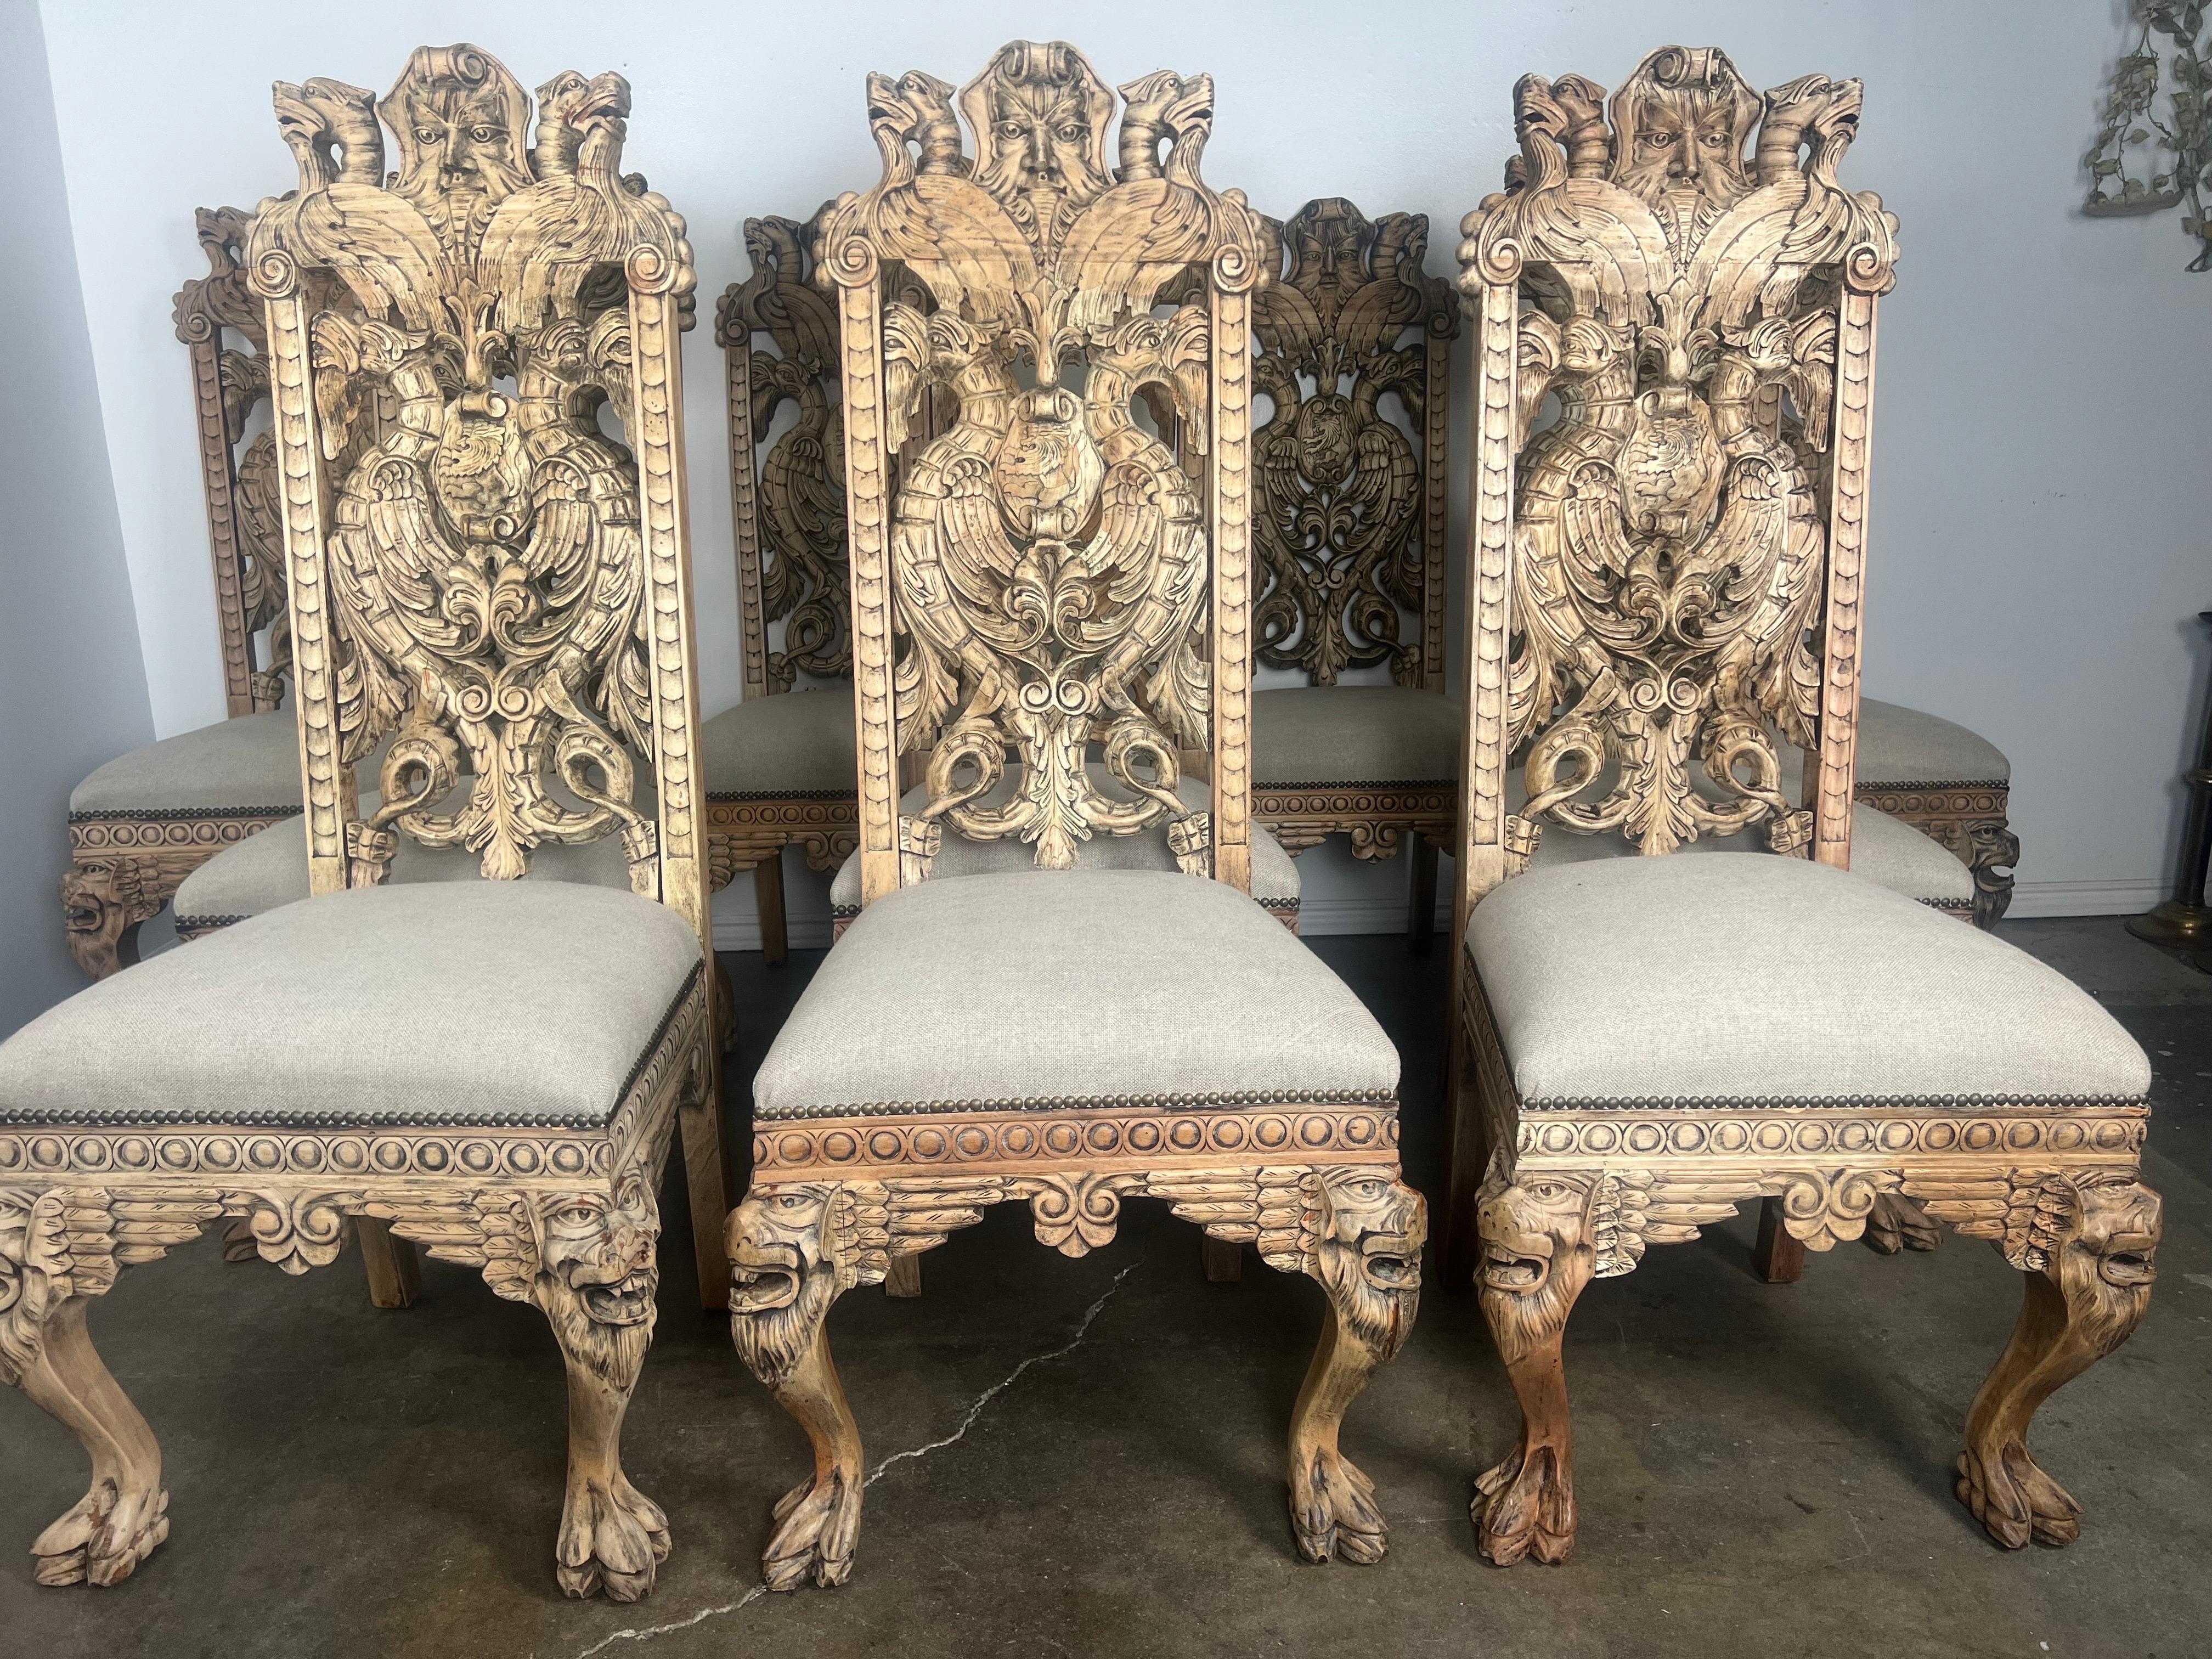 Set of ten English hand carved side dining chairs depicting intricate carved details throughout.  The chairs stand on four cabriole legs that end in lion's paw feet.  The chairs are newly reupholstered in a washed Belgium linen and are detailed with